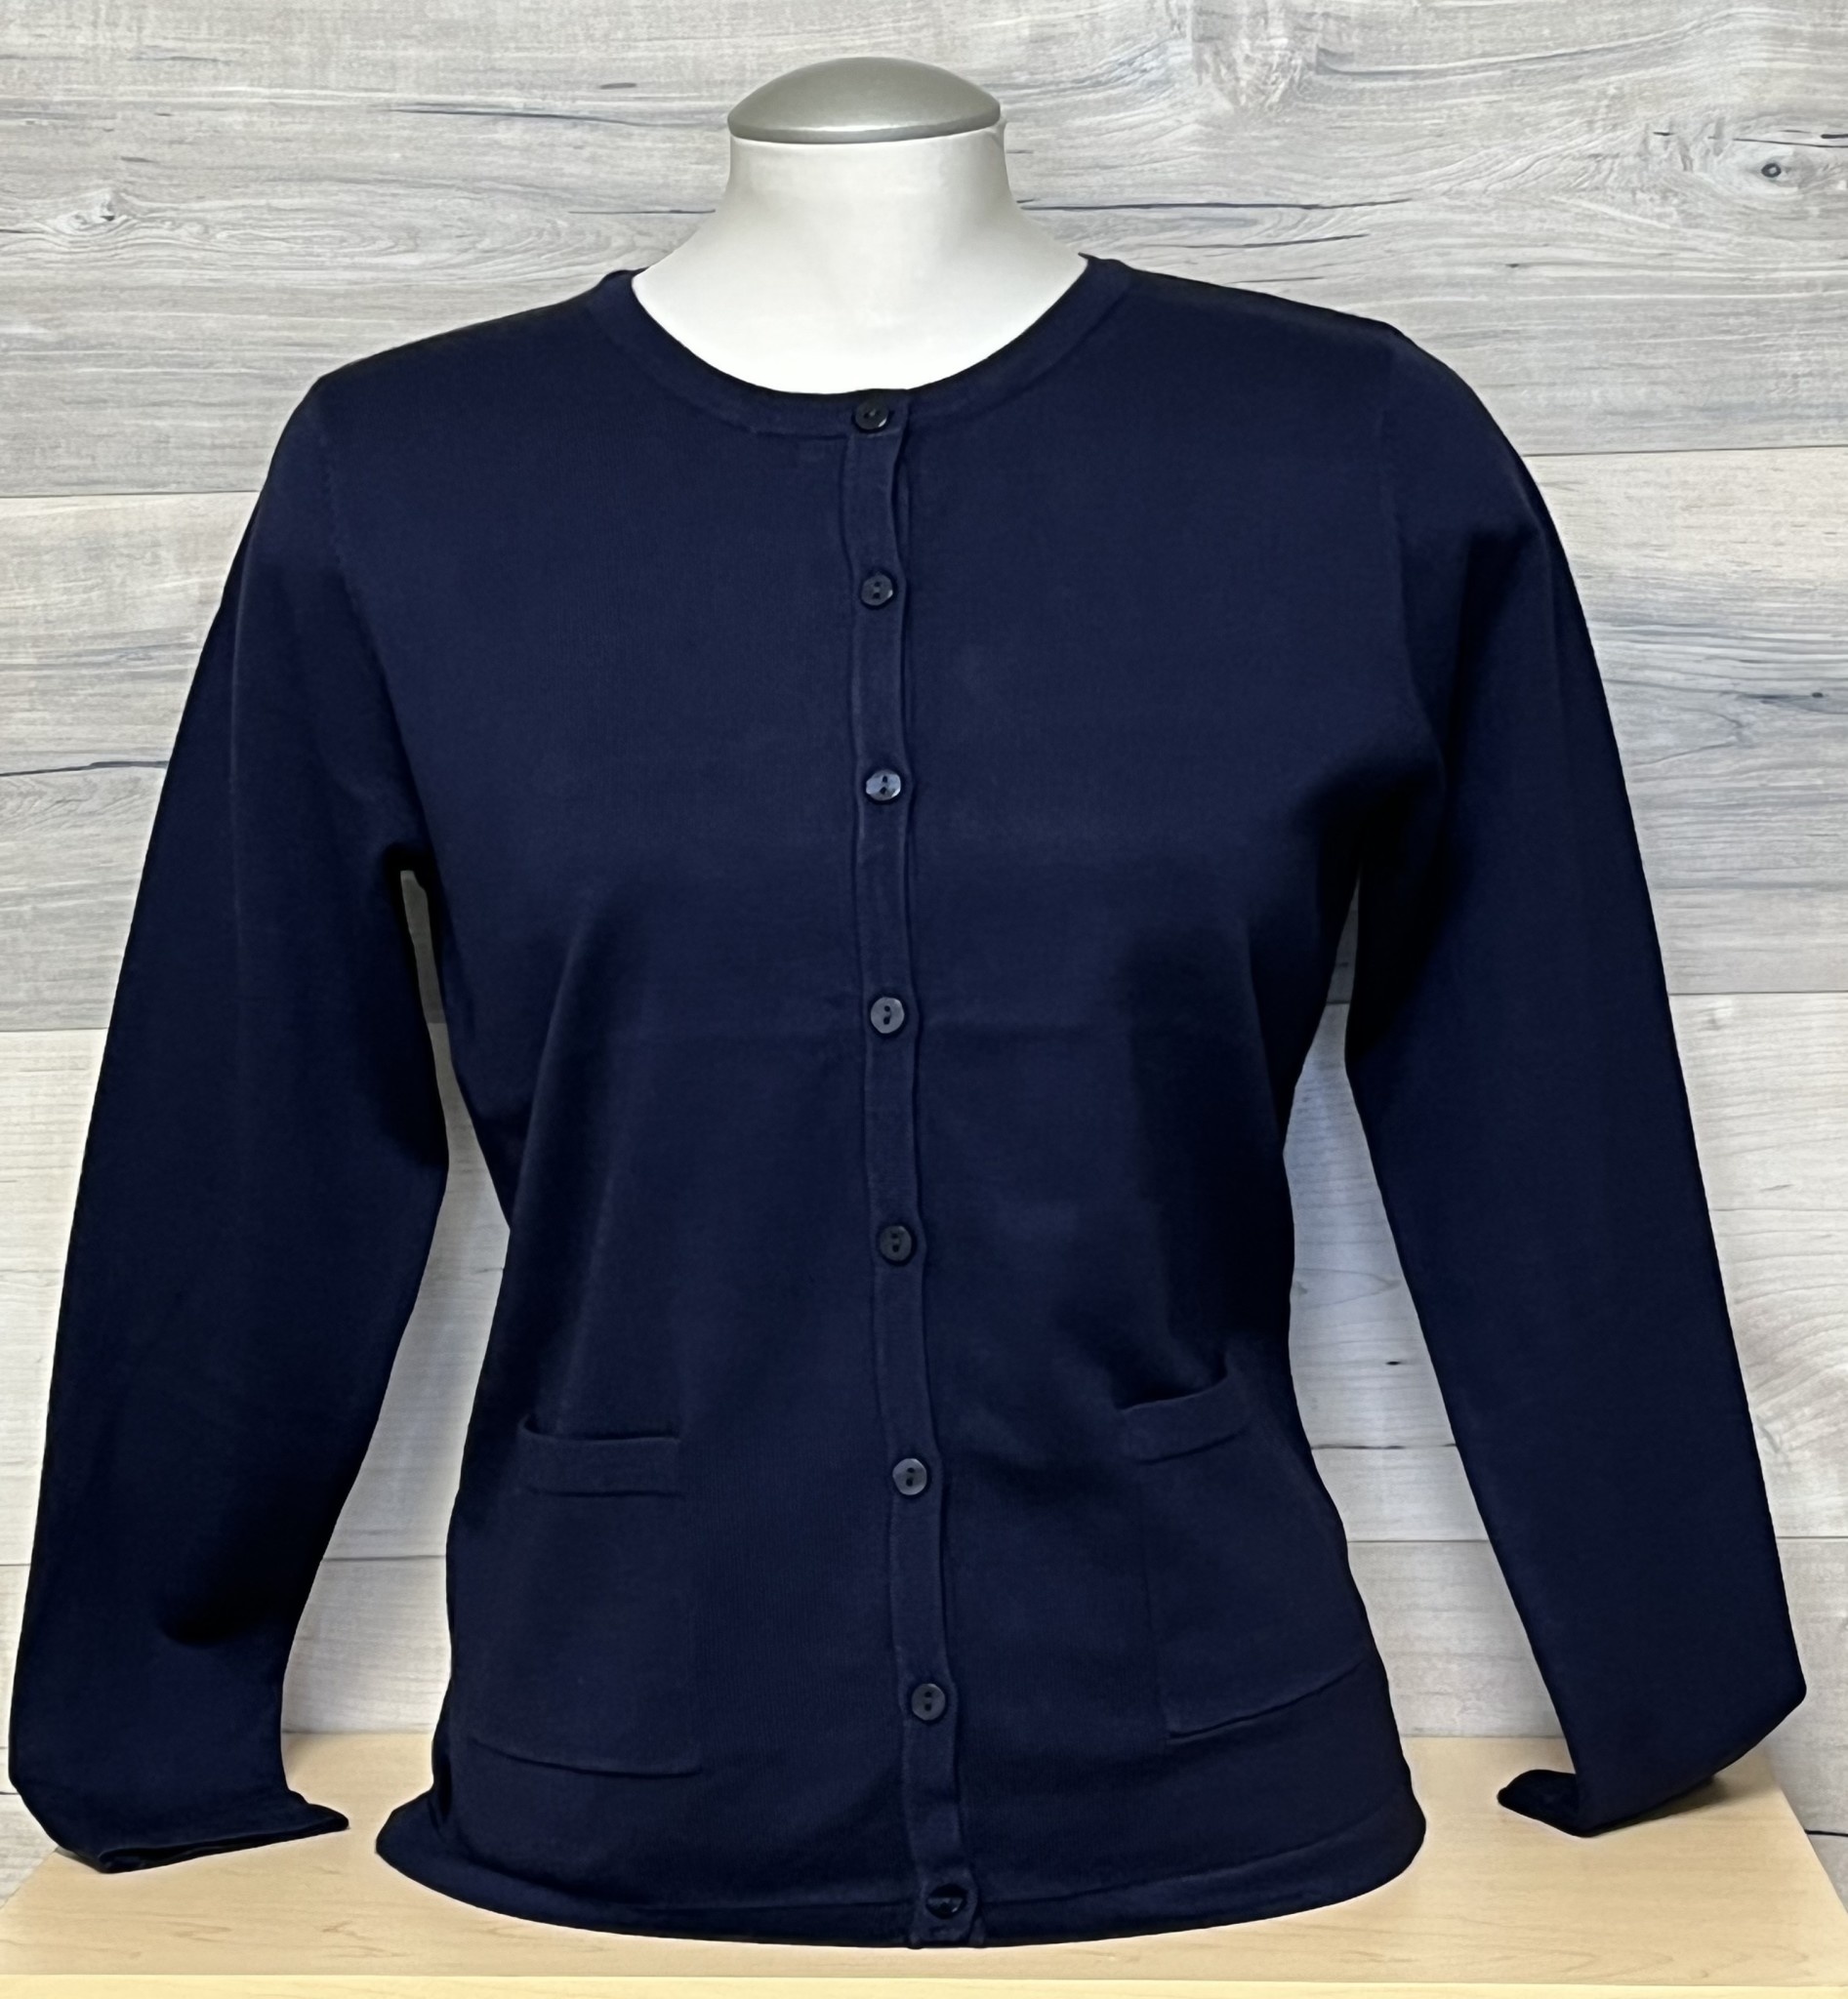 Knit Cardigan with Front Pockets - Navy